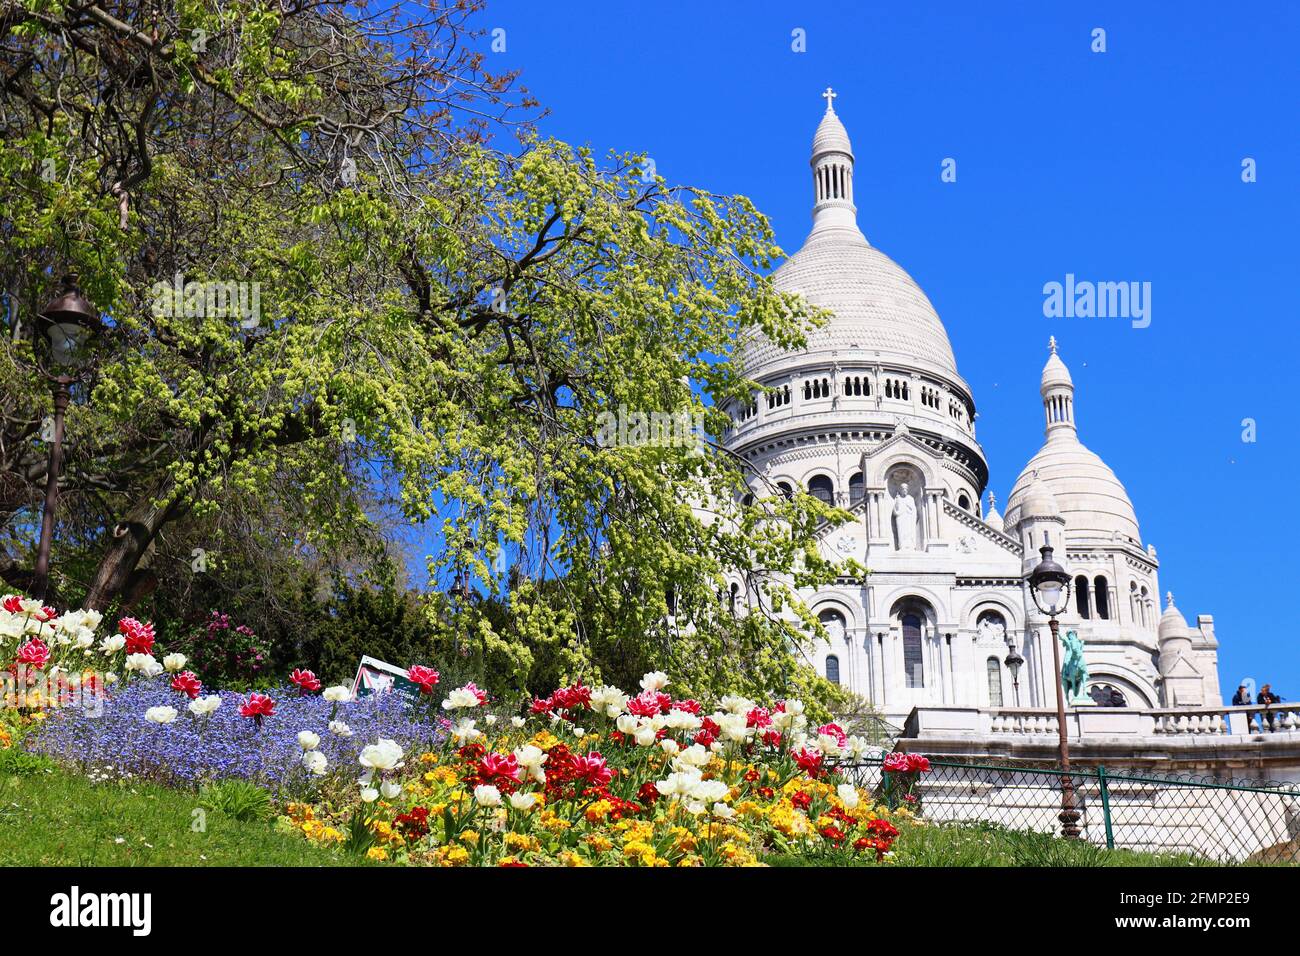 The Basilica of Sacré-Coeur de Montmartre (Sacred Heart Basilica) in Paris captured on a sunny spring day with colorful flowers in the foreground. Stock Photo